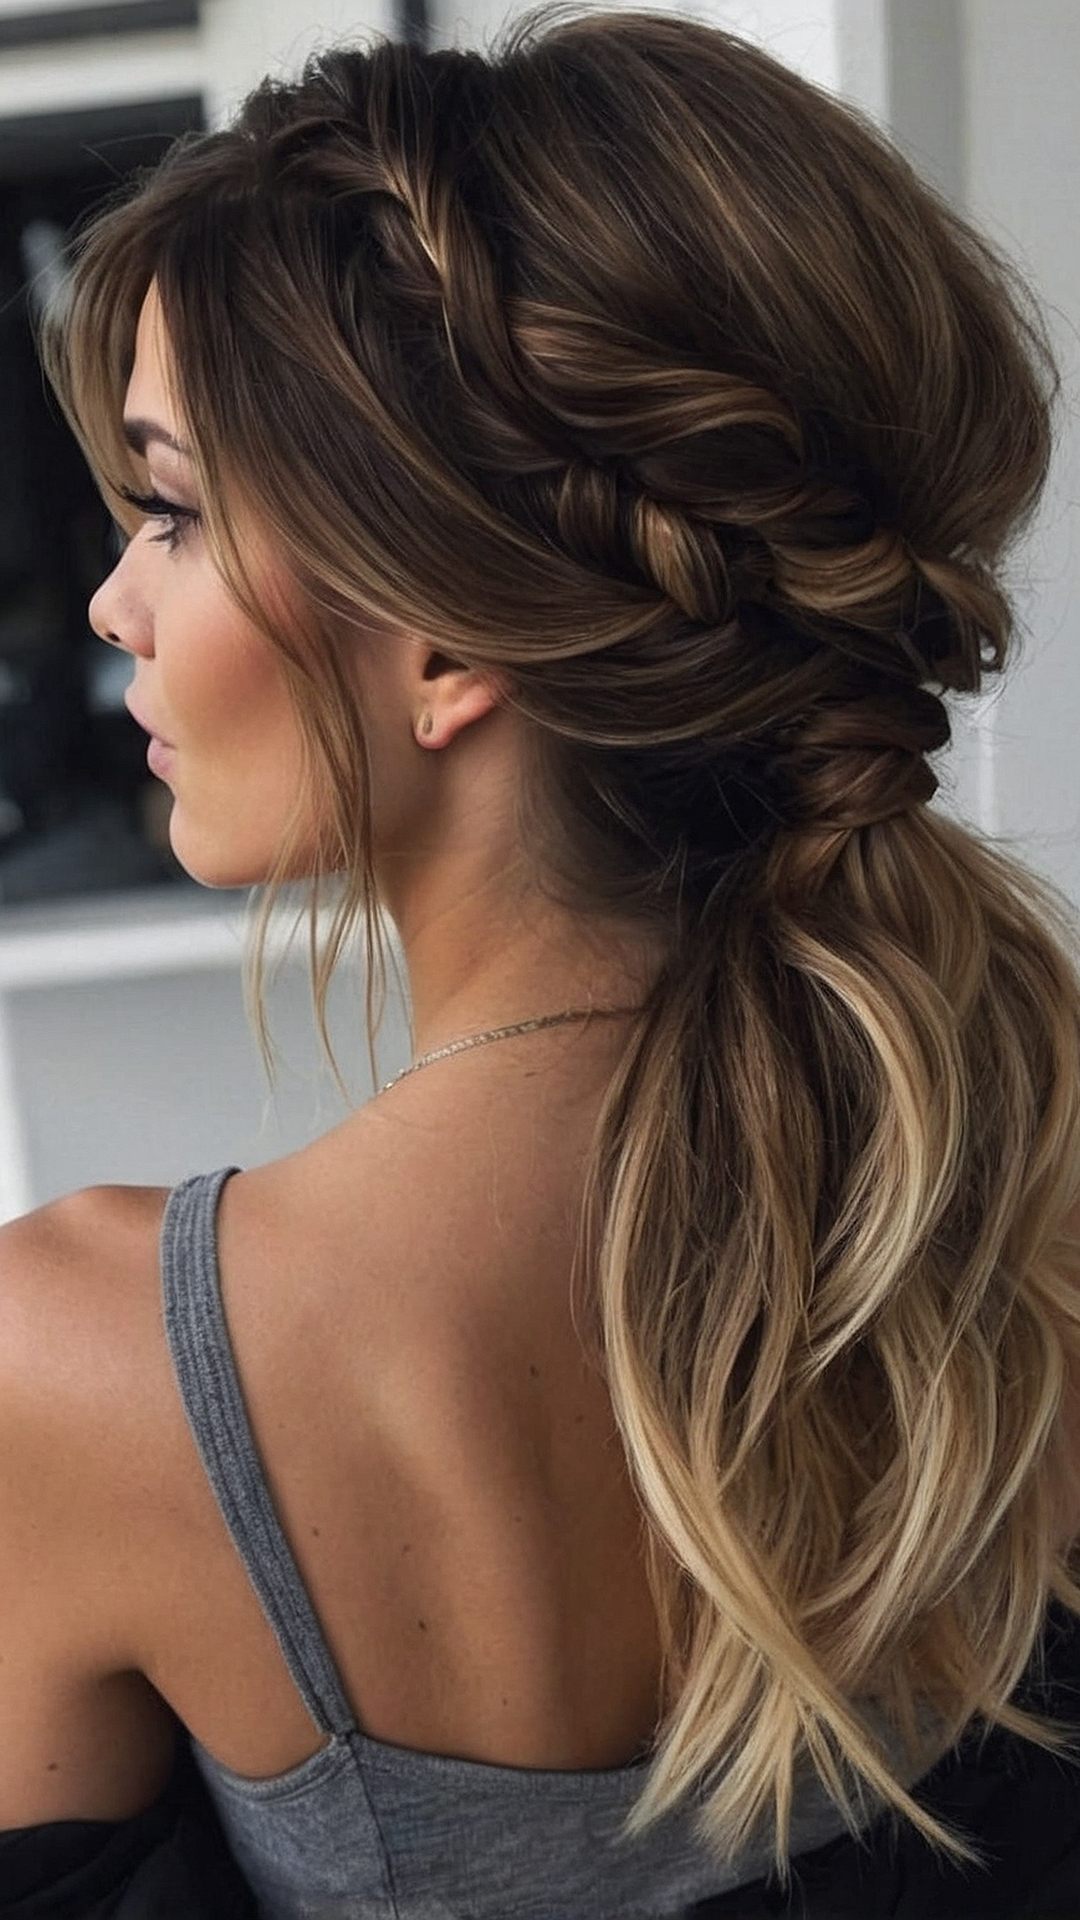 Summertime Shimmer: Sparkling Hairstyles for Summer Fun